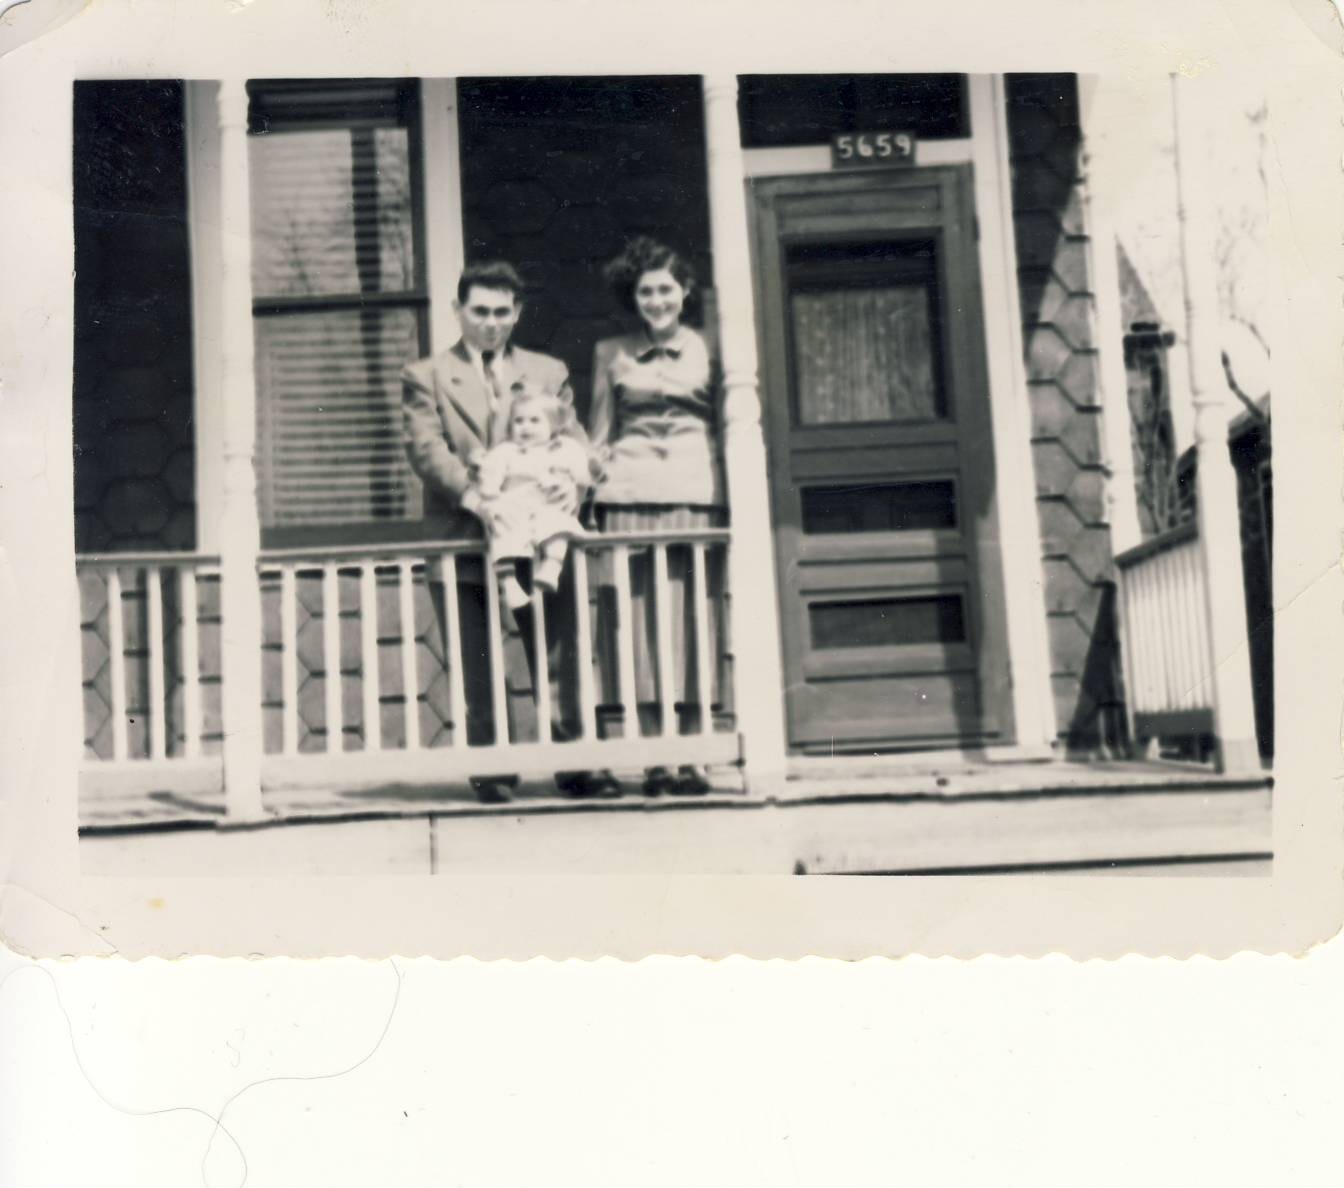 Murry, Toby and Ruth Cymber in St Louis, 1949